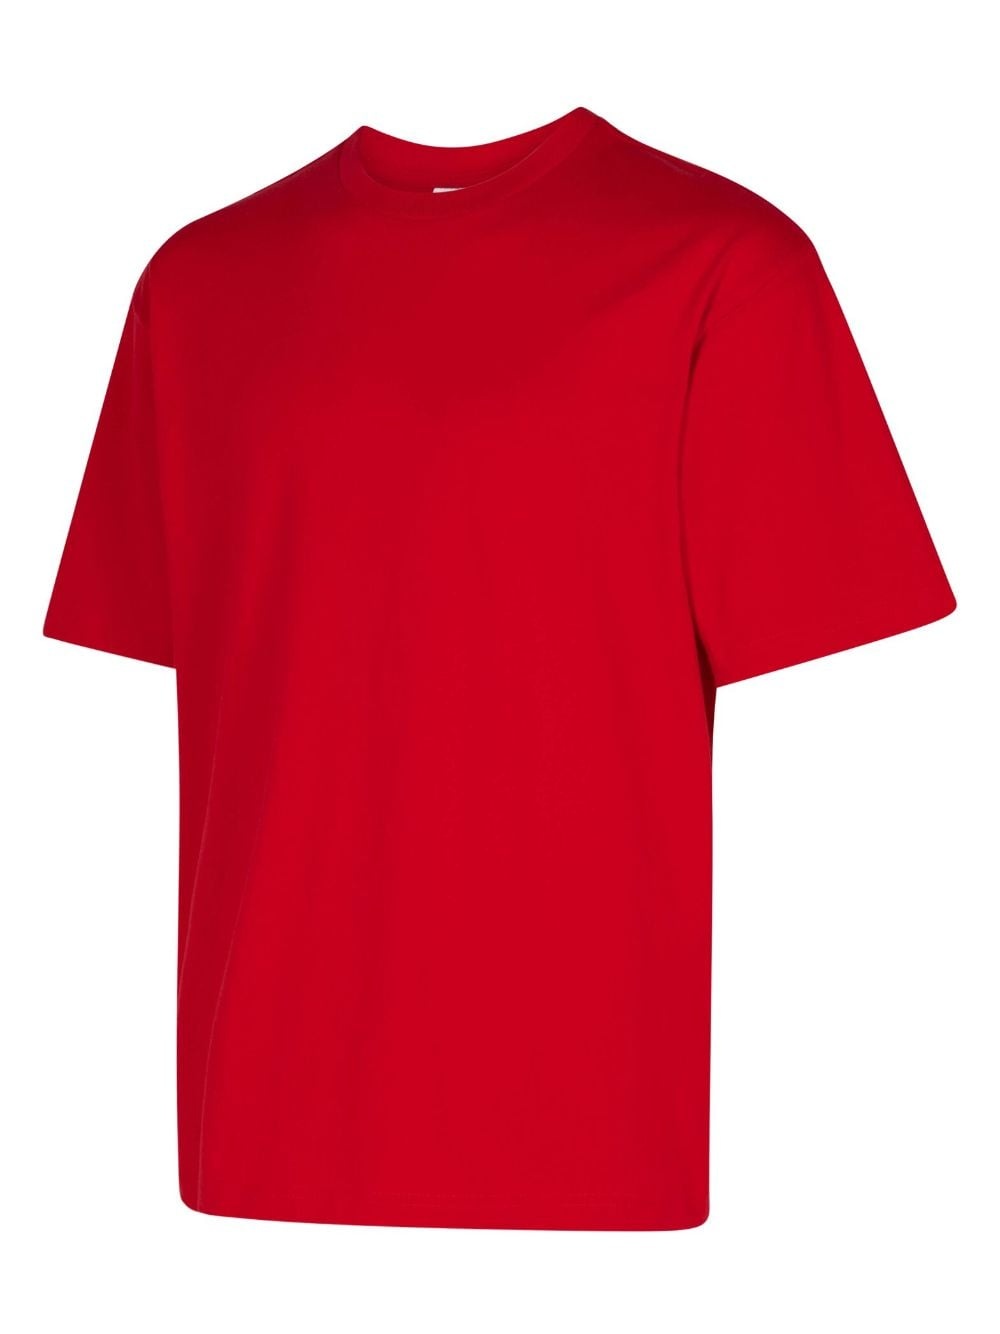 x The North Face "Red" T-shirt - 2